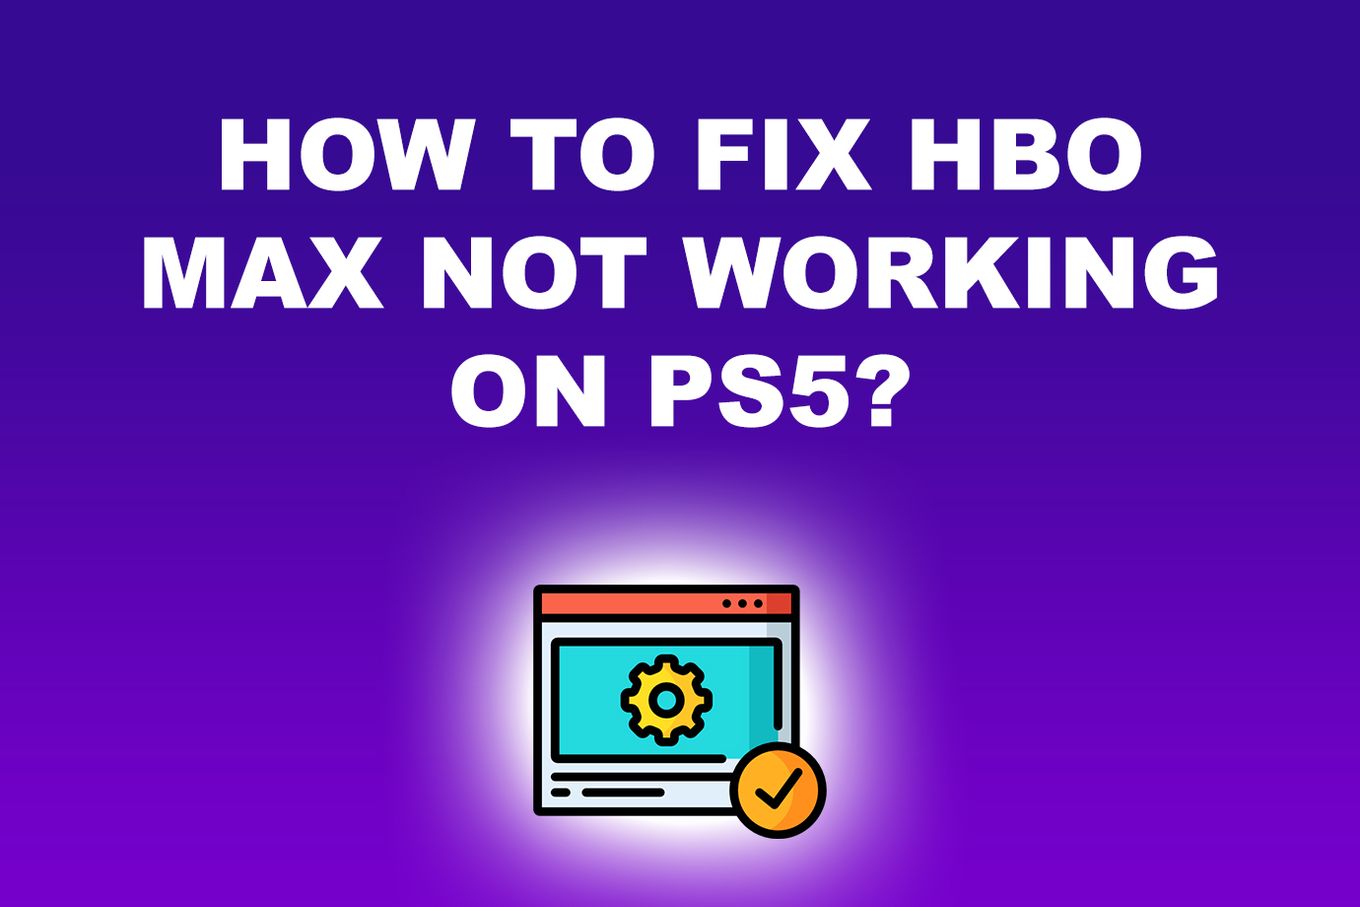 Hbo Max Not Working on Ps5? Fix The Bugs In The App And Console